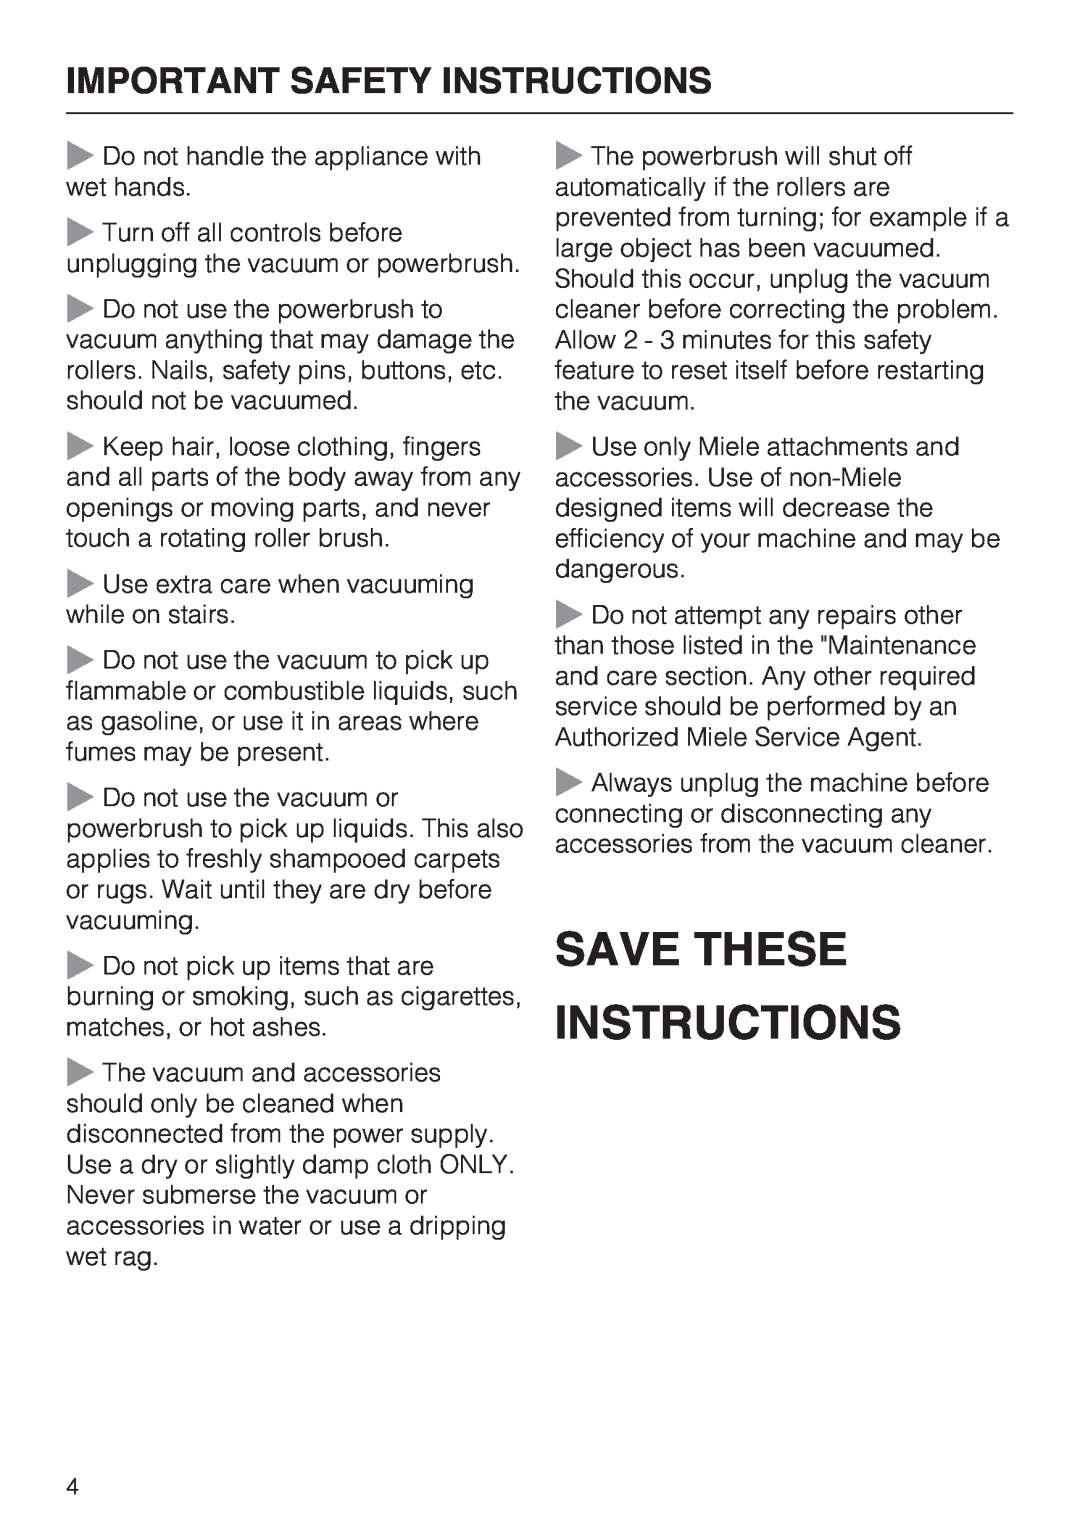 Miele 217-3, 217-2, 213-2 operating instructions Save These Instructions, Important Safety Instructions 